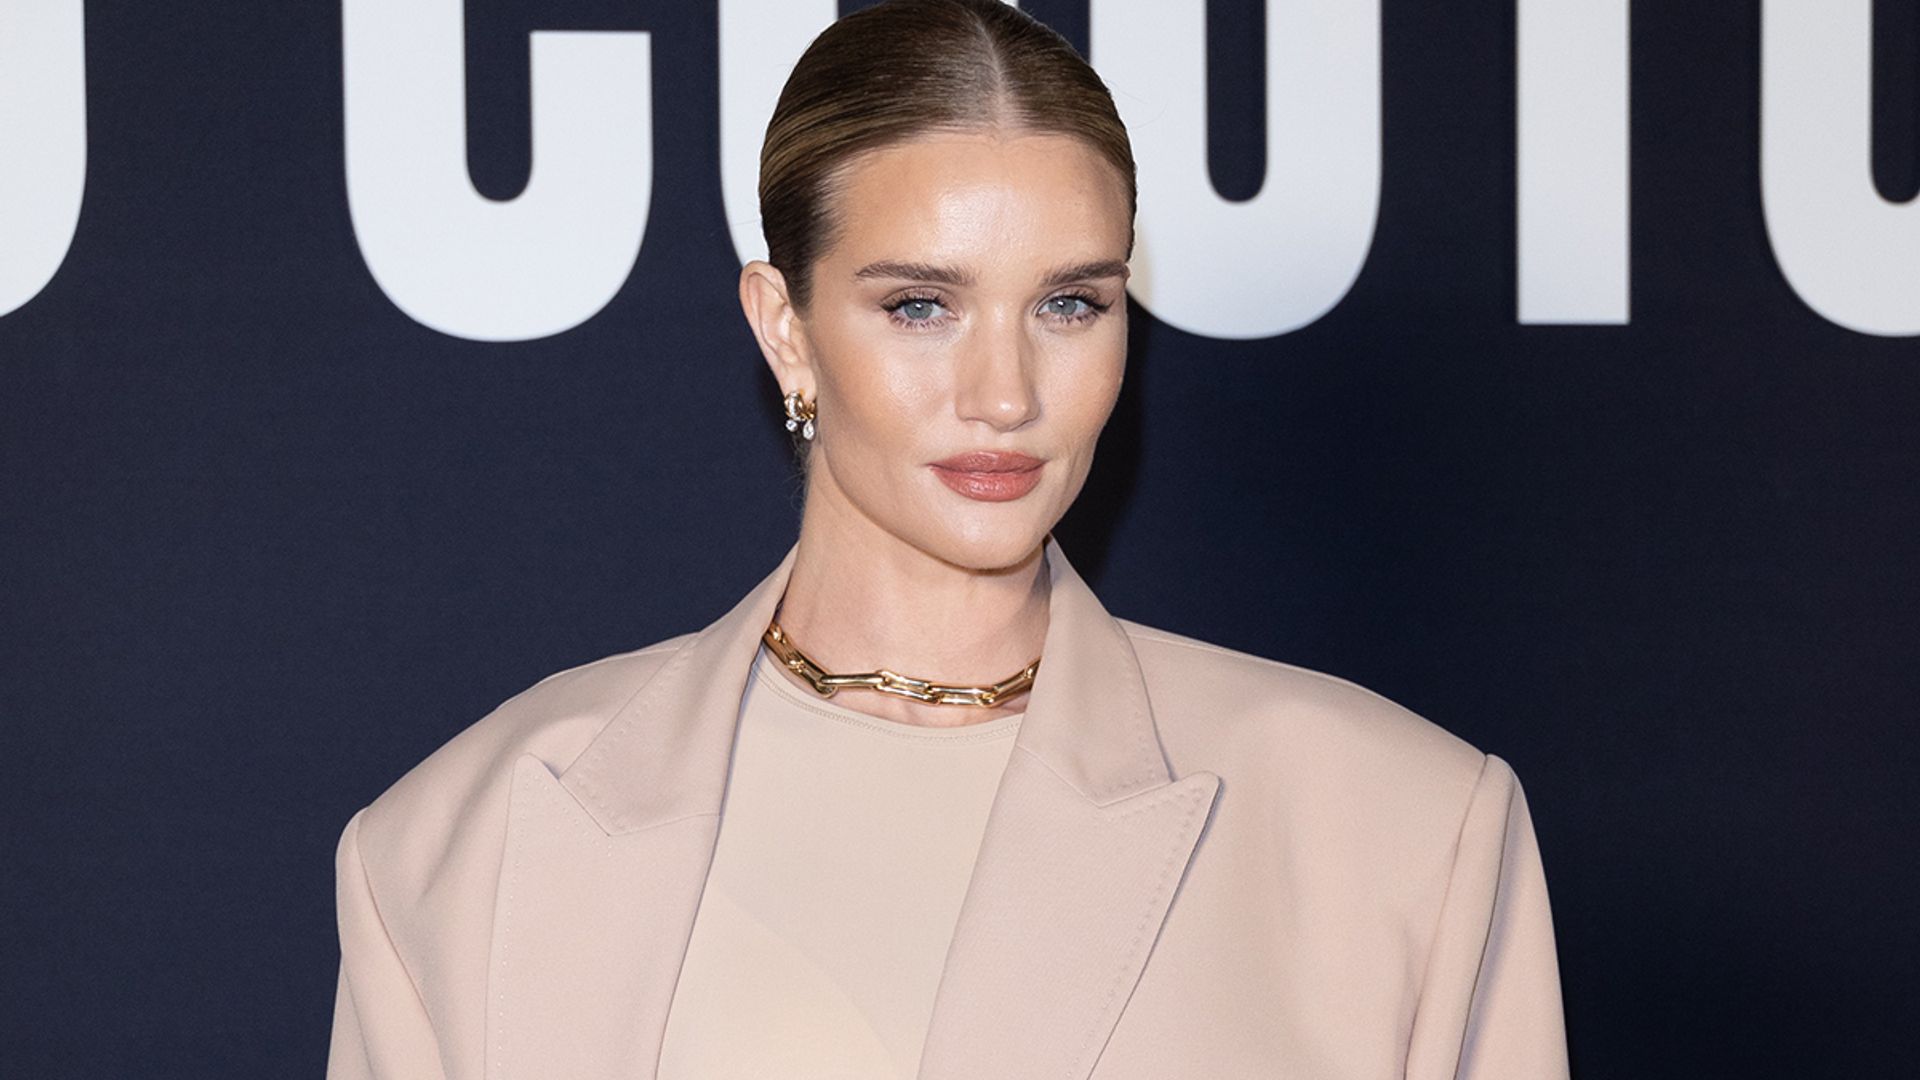 Rosie Huntington-Whiteley's feathered blazer is the ultimate 2023 partywear trend to try this spring